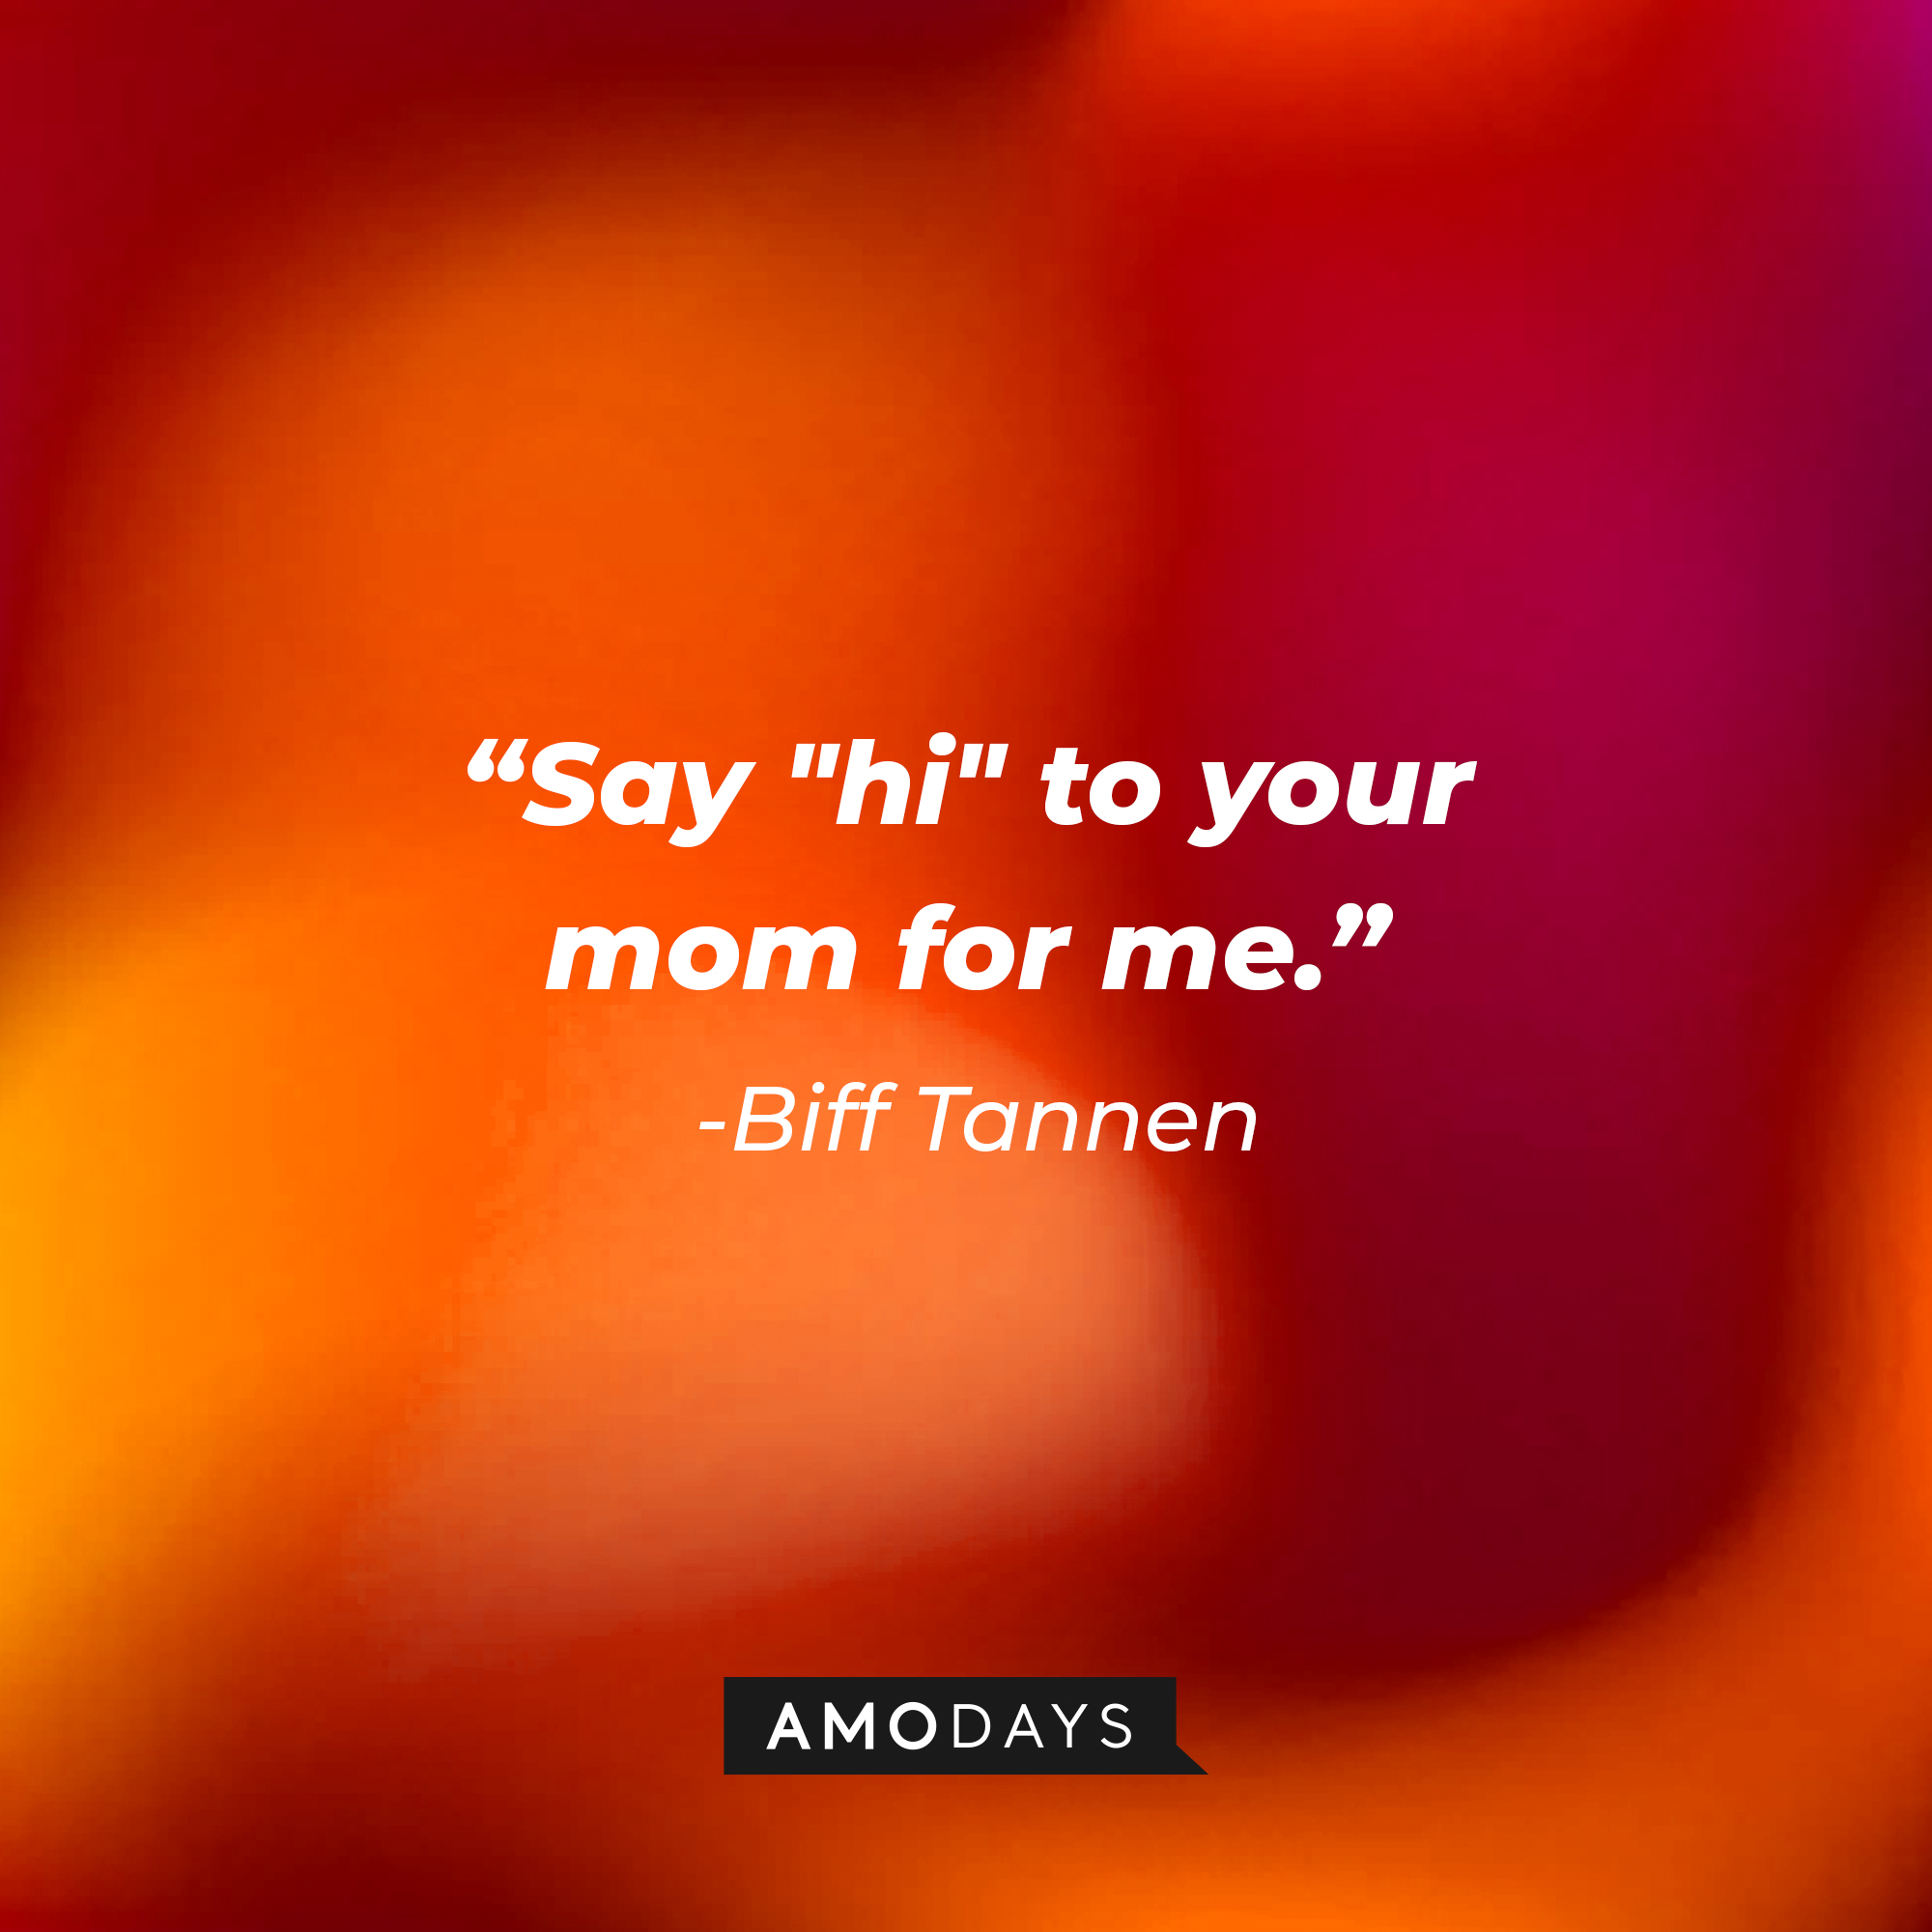 Biff Tannen’s quote: “Say "hi" to your mom for me.” | Source: AmoDays